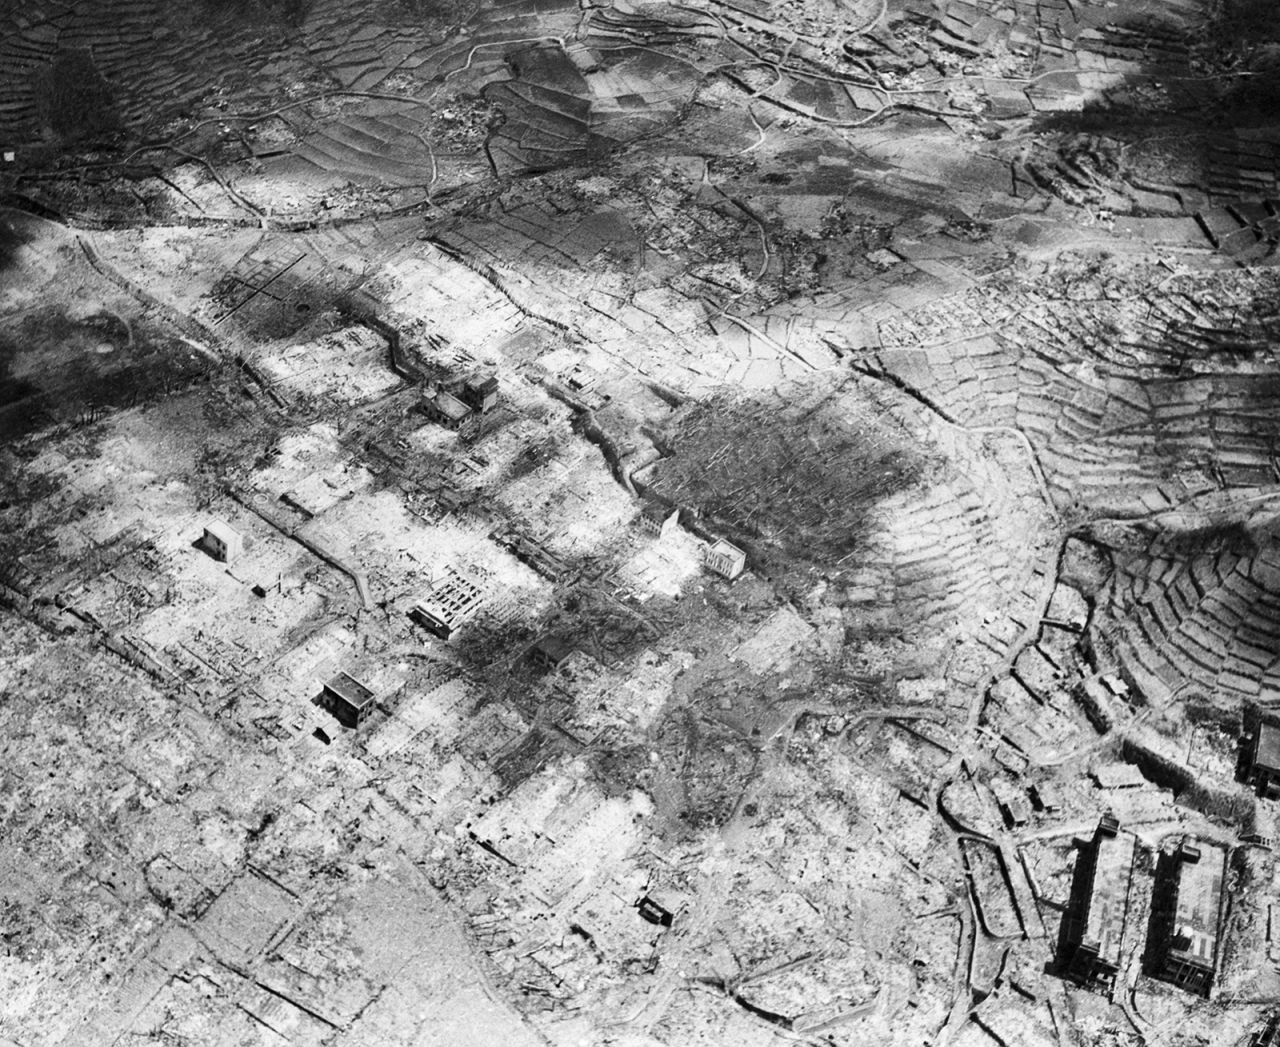 An aerial view of Nagasaki after the bombing.